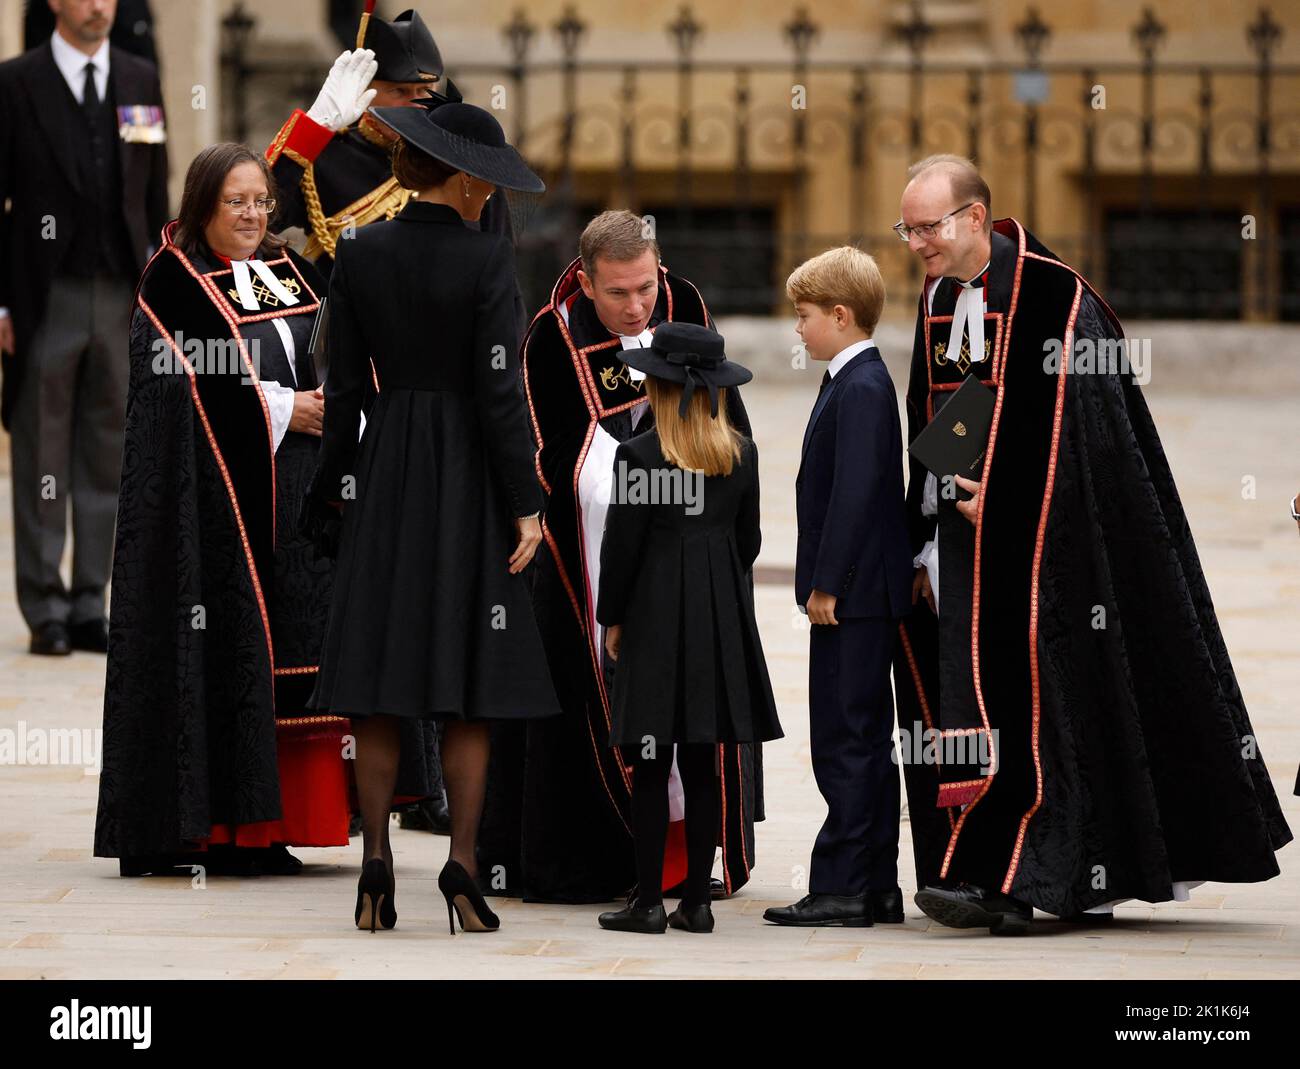 Britain's Catherine, Princess of Wales, Britain's Princess Charlotte and Britain's Prince George are greeted by The Reverend Jamie Hawkey, The Right Reverend Anthony Ball and The Venerable Patricia Hillas outside Westminster Abbey on the day of state funeral and burial of Britain's Queen Elizabeth, in London, Britain, September 19, 2022 REUTERS/John Sibley Stock Photo